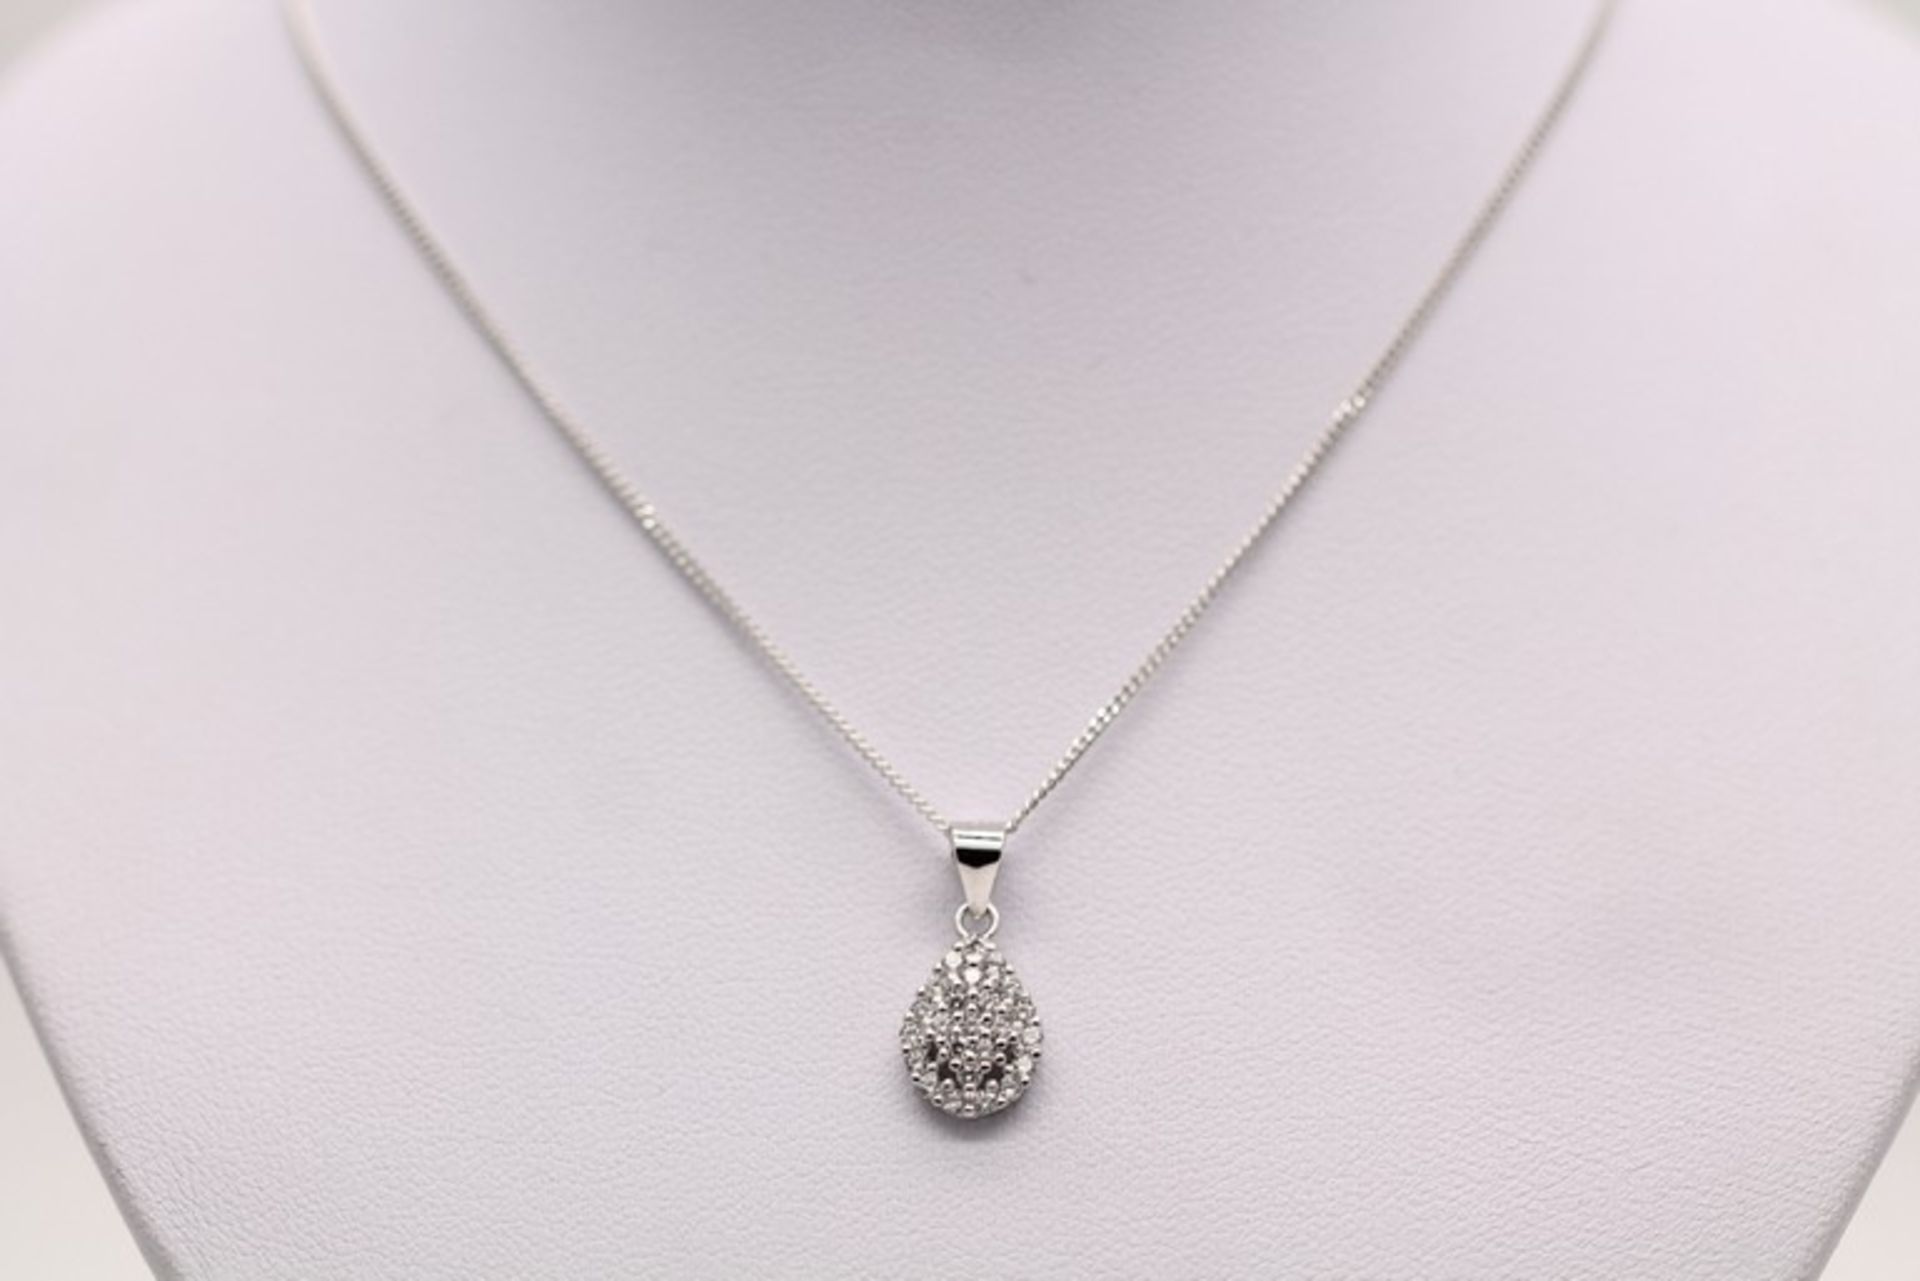 1 x BOXED BRAND NEW SOLID SILVER LADIES NECKLACE SET WITH A CLUSTER AAA+ SIMULATED DIAMOND